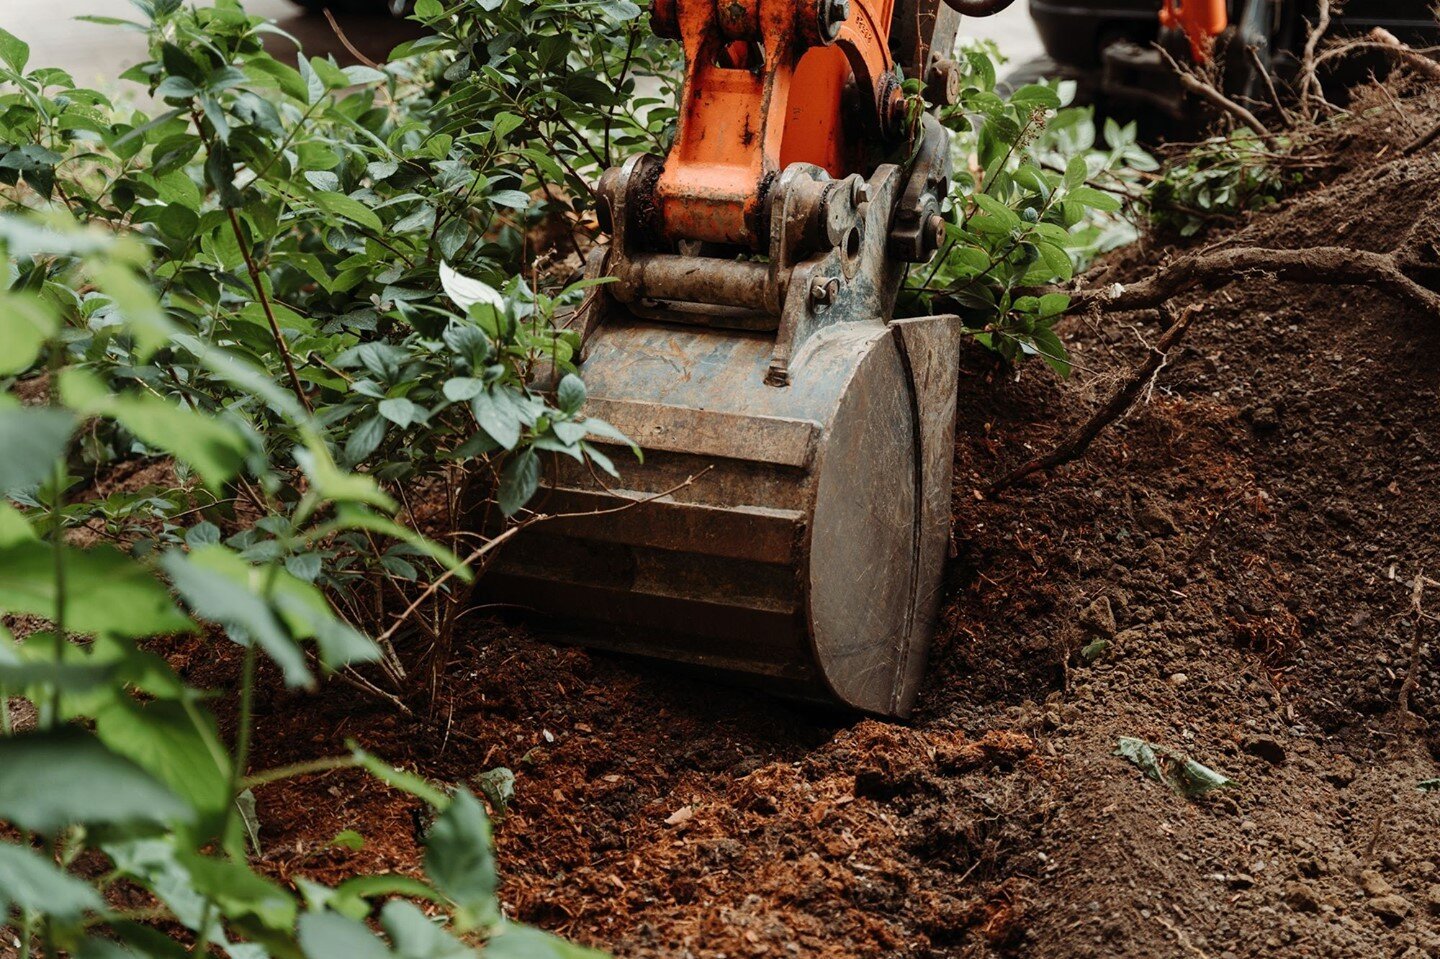 Do you have overgrown shrubs? Are you looking to do some landscape transformation on your property? ⠀
⠀
If so, give us a call today.  We have the equipment to handle any project, big or small.